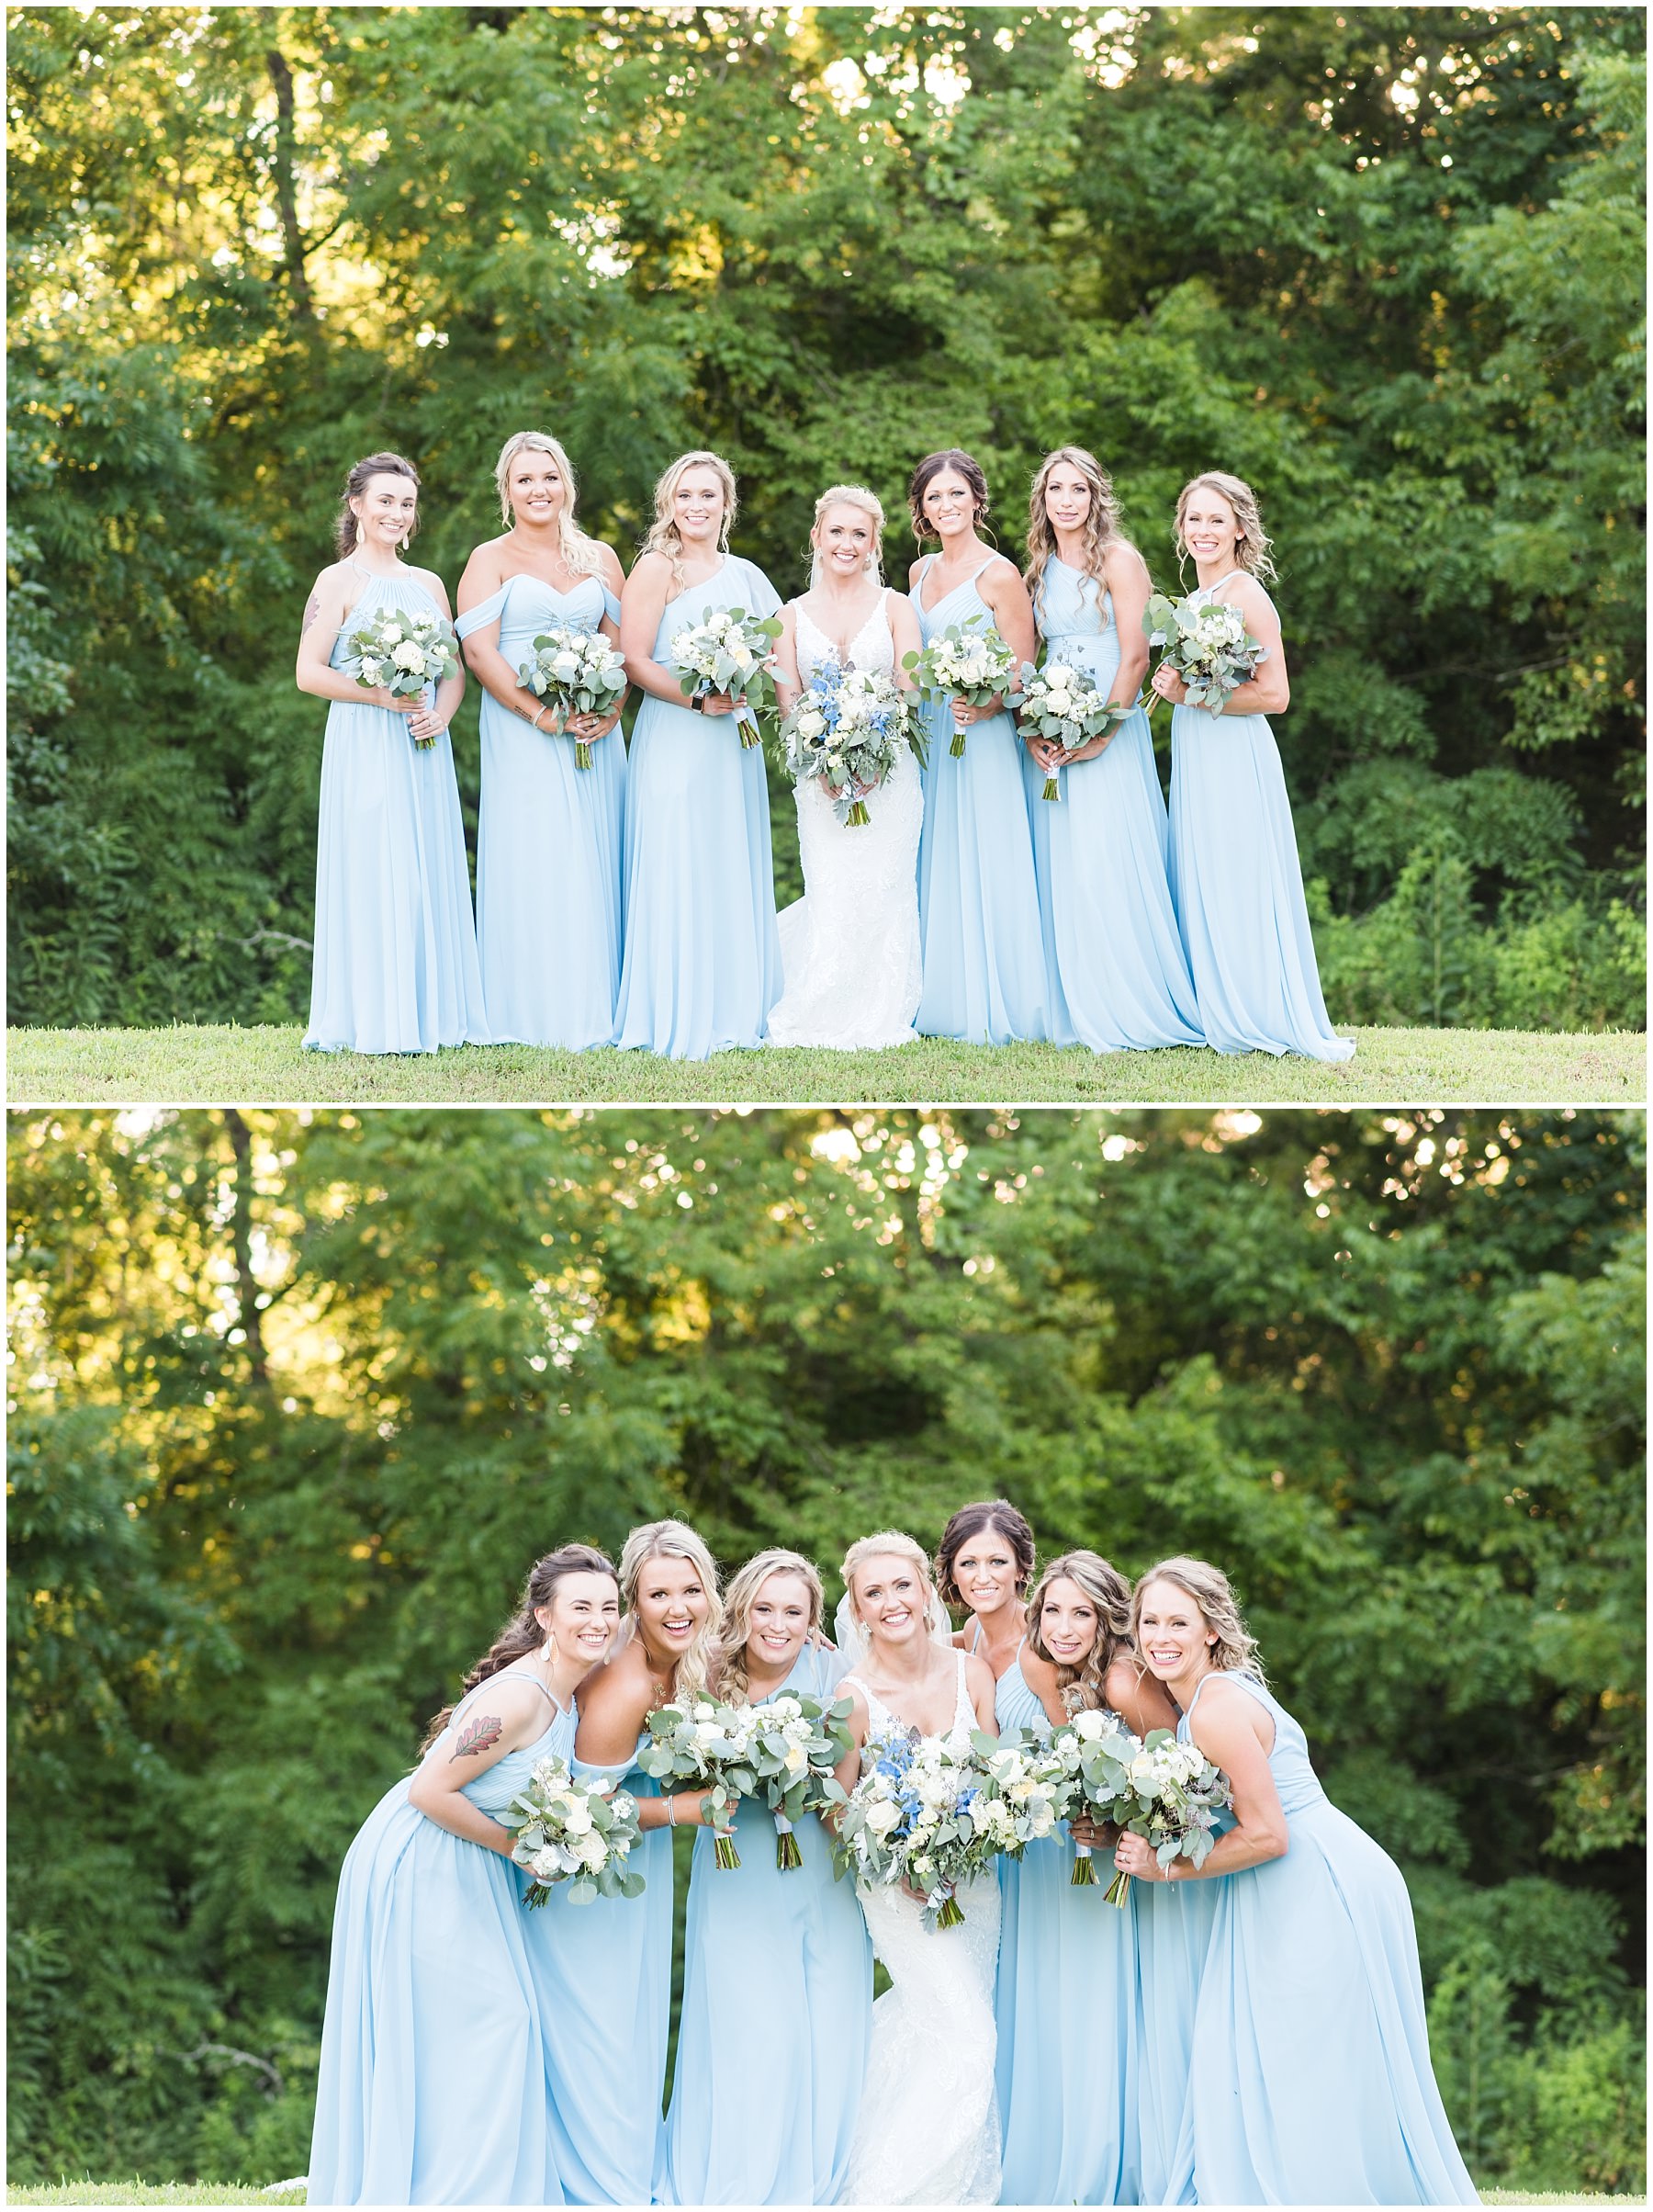 Bridesmaids in light blue dresses and bride posed for wedding portraits at Tucker's Gap in Lebanon, TN